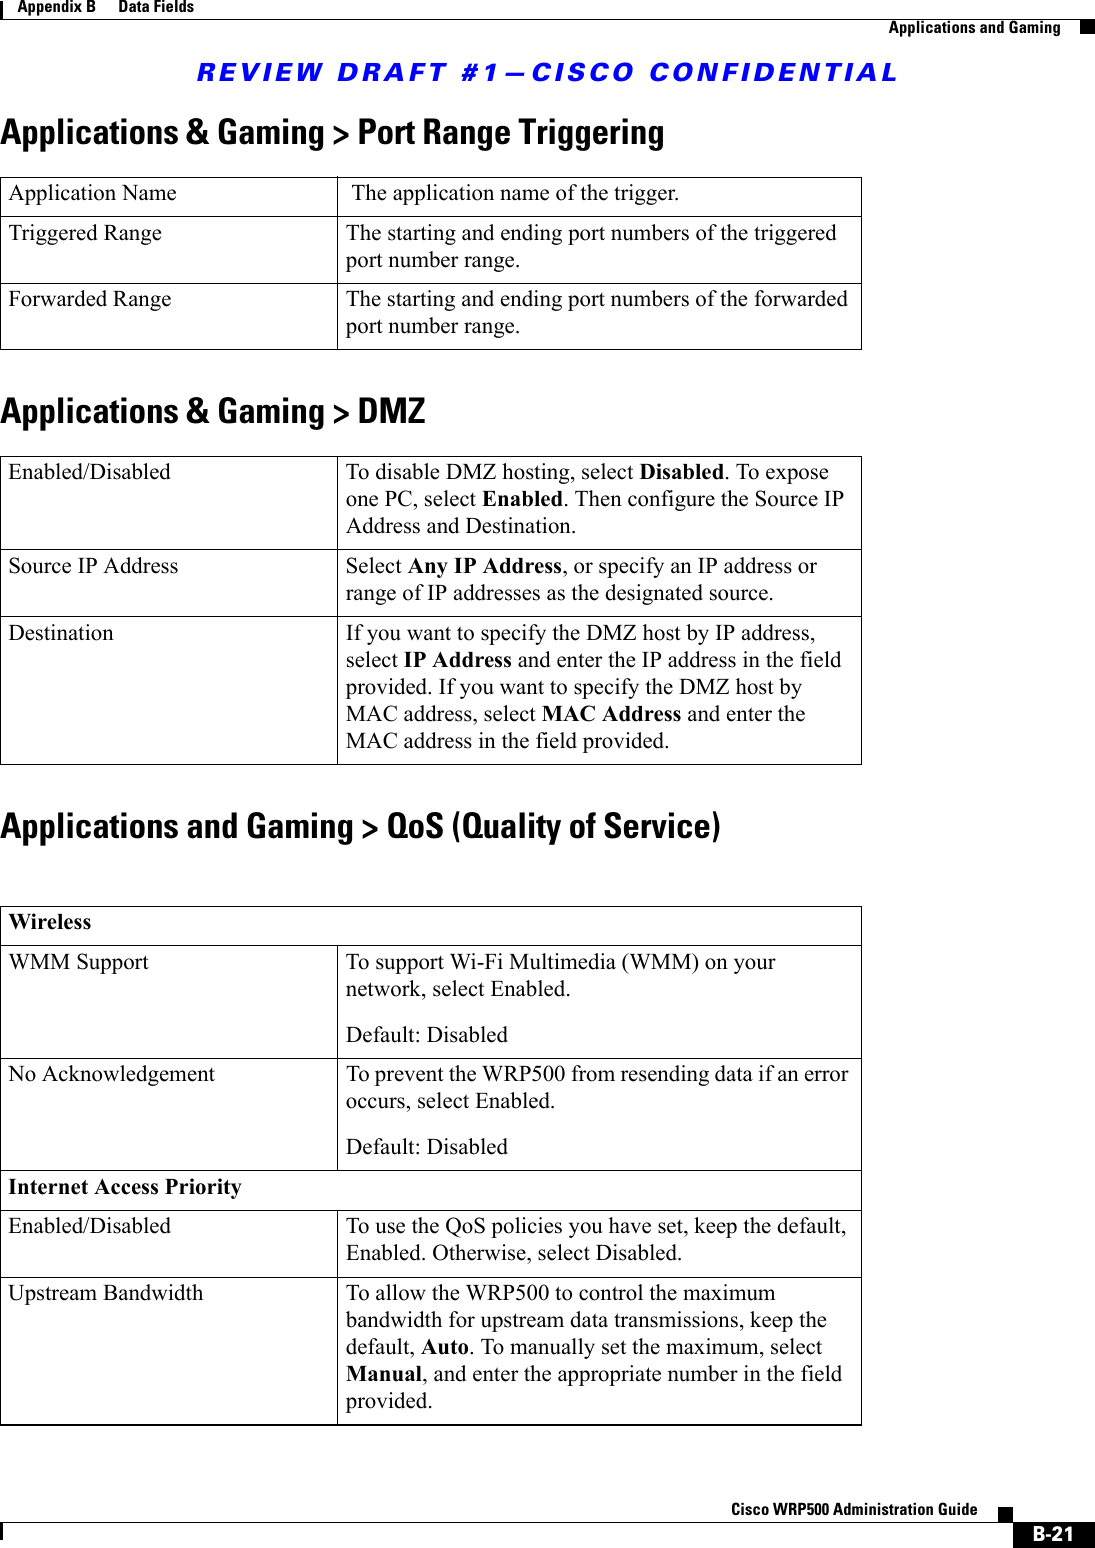 REVIEW DRAFT #1—CISCO CONFIDENTIALB-21Cisco WRP500 Administration Guide Appendix B      Data Fields  Applications and GamingApplications &amp; Gaming &gt; Port Range TriggeringApplications &amp; Gaming &gt; DMZApplications and Gaming &gt; QoS (Quality of Service)Application Name  The application name of the trigger.Triggered Range The starting and ending port numbers of the triggered port number range. Forwarded Range The starting and ending port numbers of the forwarded port number range. Enabled/Disabled To disable DMZ hosting, select Disabled. To expose one PC, select Enabled. Then configure the Source IP Address and Destination.Source IP Address Select Any IP Address, or specify an IP address or range of IP addresses as the designated source.Destination If you want to specify the DMZ host by IP address, select IP Address and enter the IP address in the field provided. If you want to specify the DMZ host by MAC address, select MAC Address and enter the MAC address in the field provided. WirelessWMM Support To support Wi-Fi Multimedia (WMM) on your network, select Enabled. Default: DisabledNo Acknowledgement To prevent the WRP500 from resending data if an error occurs, select Enabled. Default: DisabledInternet Access PriorityEnabled/Disabled To use the QoS policies you have set, keep the default, Enabled. Otherwise, select Disabled.Upstream Bandwidth To allow the WRP500 to control the maximum bandwidth for upstream data transmissions, keep the default, Auto. To manually set the maximum, select Manual, and enter the appropriate number in the field provided.